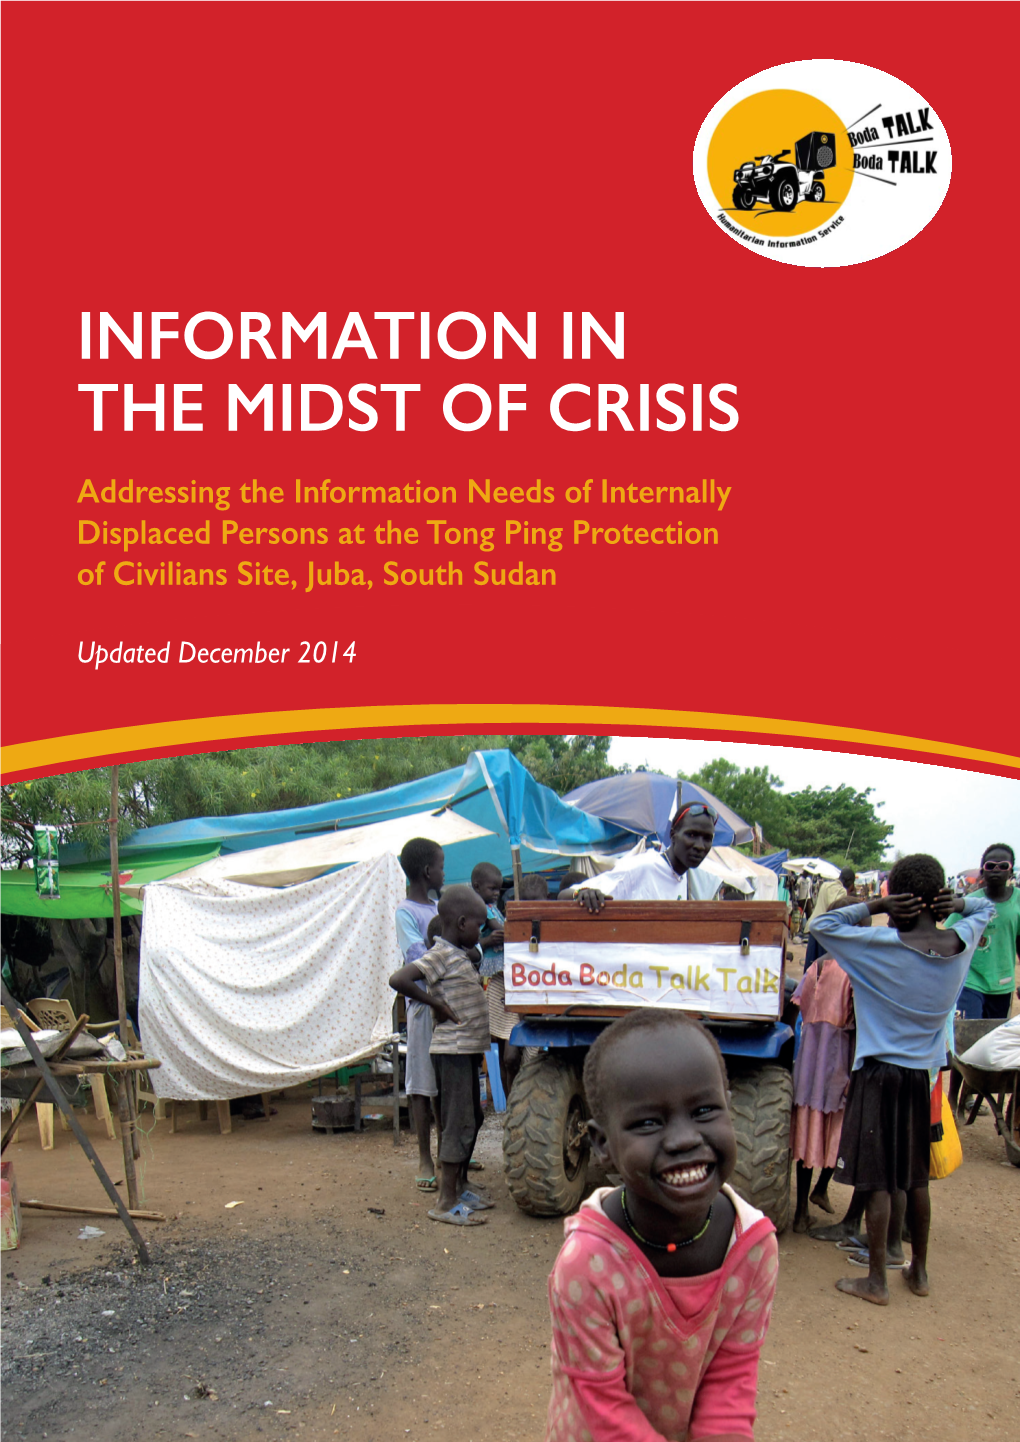 INFORMATION in the MIDST of CRISIS Addressing the Information Needs of Internally Displaced Persons at the Tong Ping Protection of Civilians Site, Juba, South Sudan